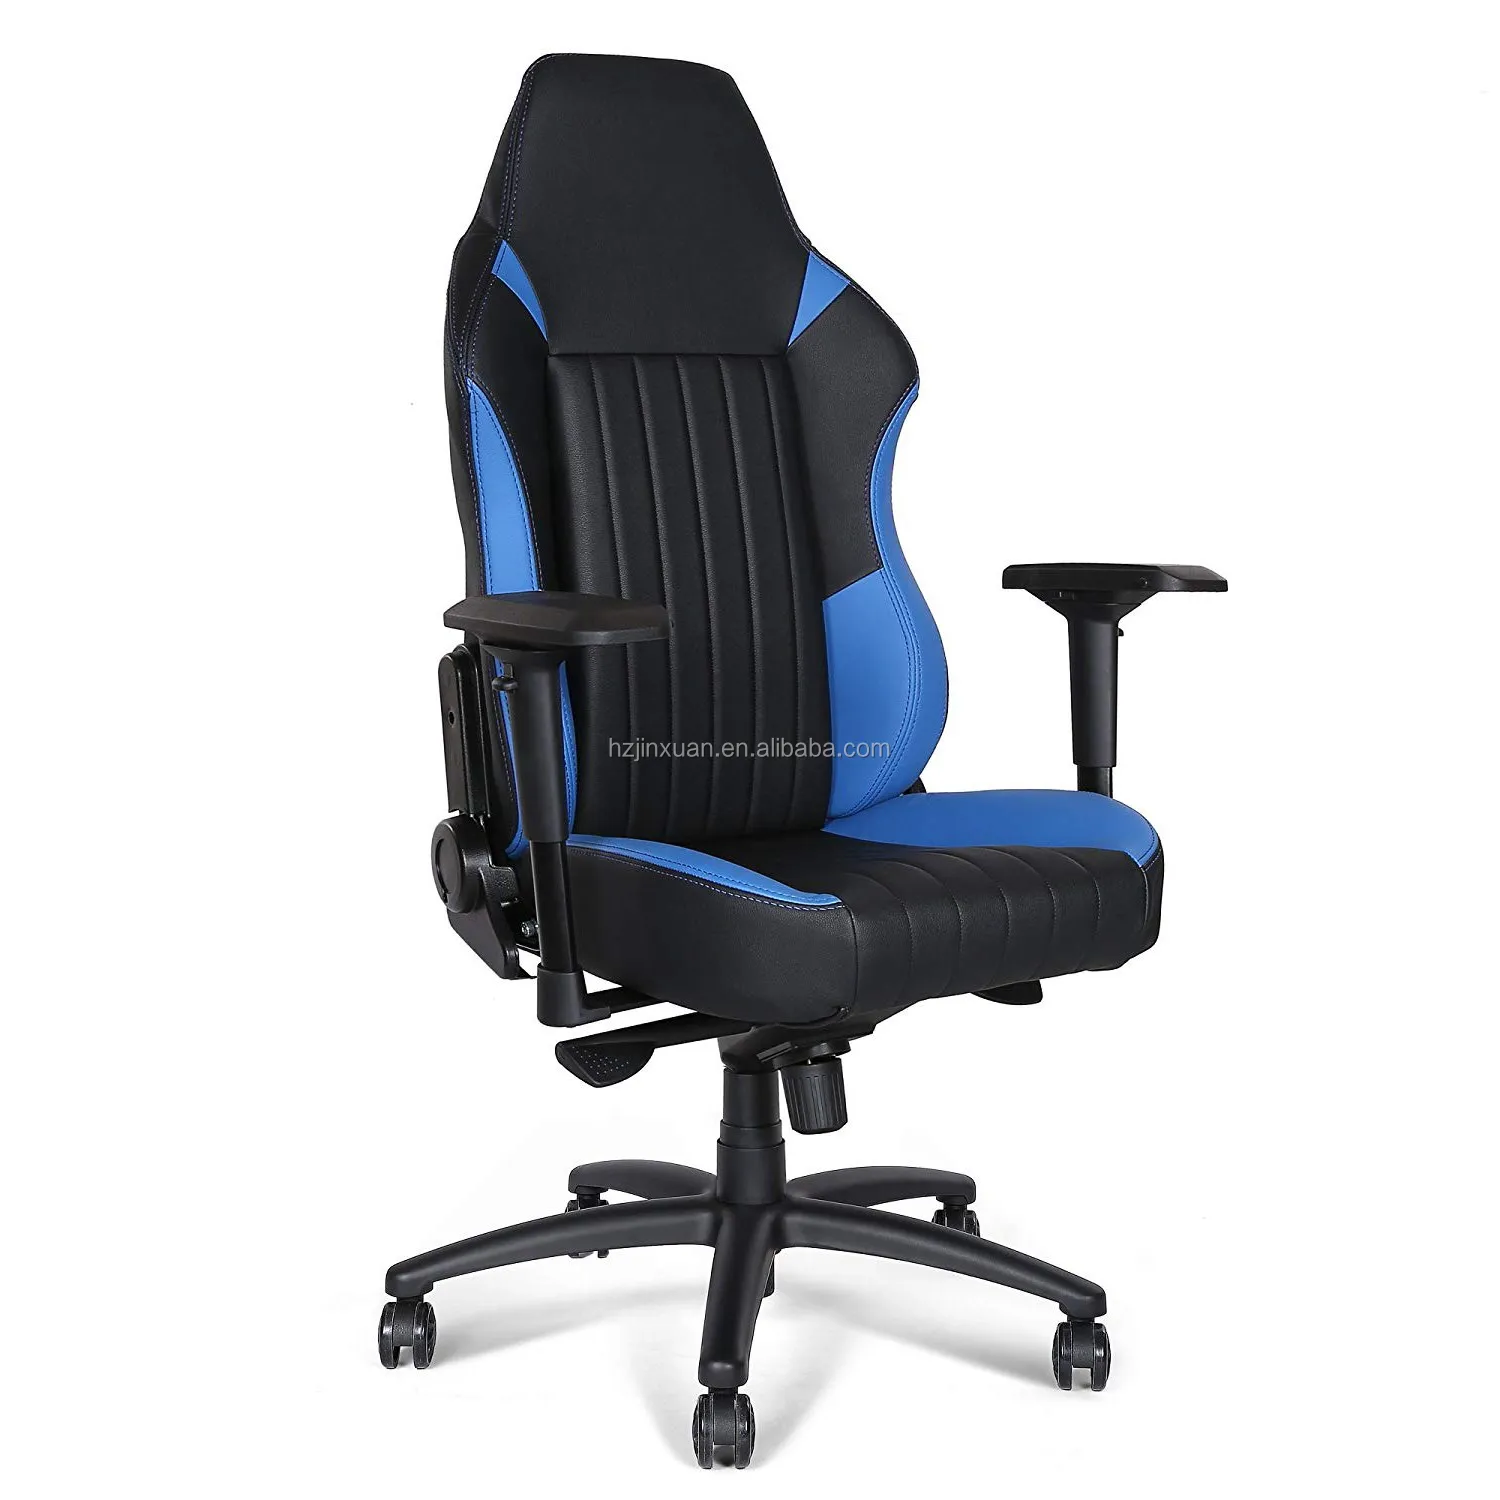 Sale Executive Leather Japan Fashion Pc Best Game Racing Chair With Wheel Swivel Gaming Office Chair Gamestoel Buy Executive Leather Japan,Silla Game,Video Game Chair on Alibaba.com